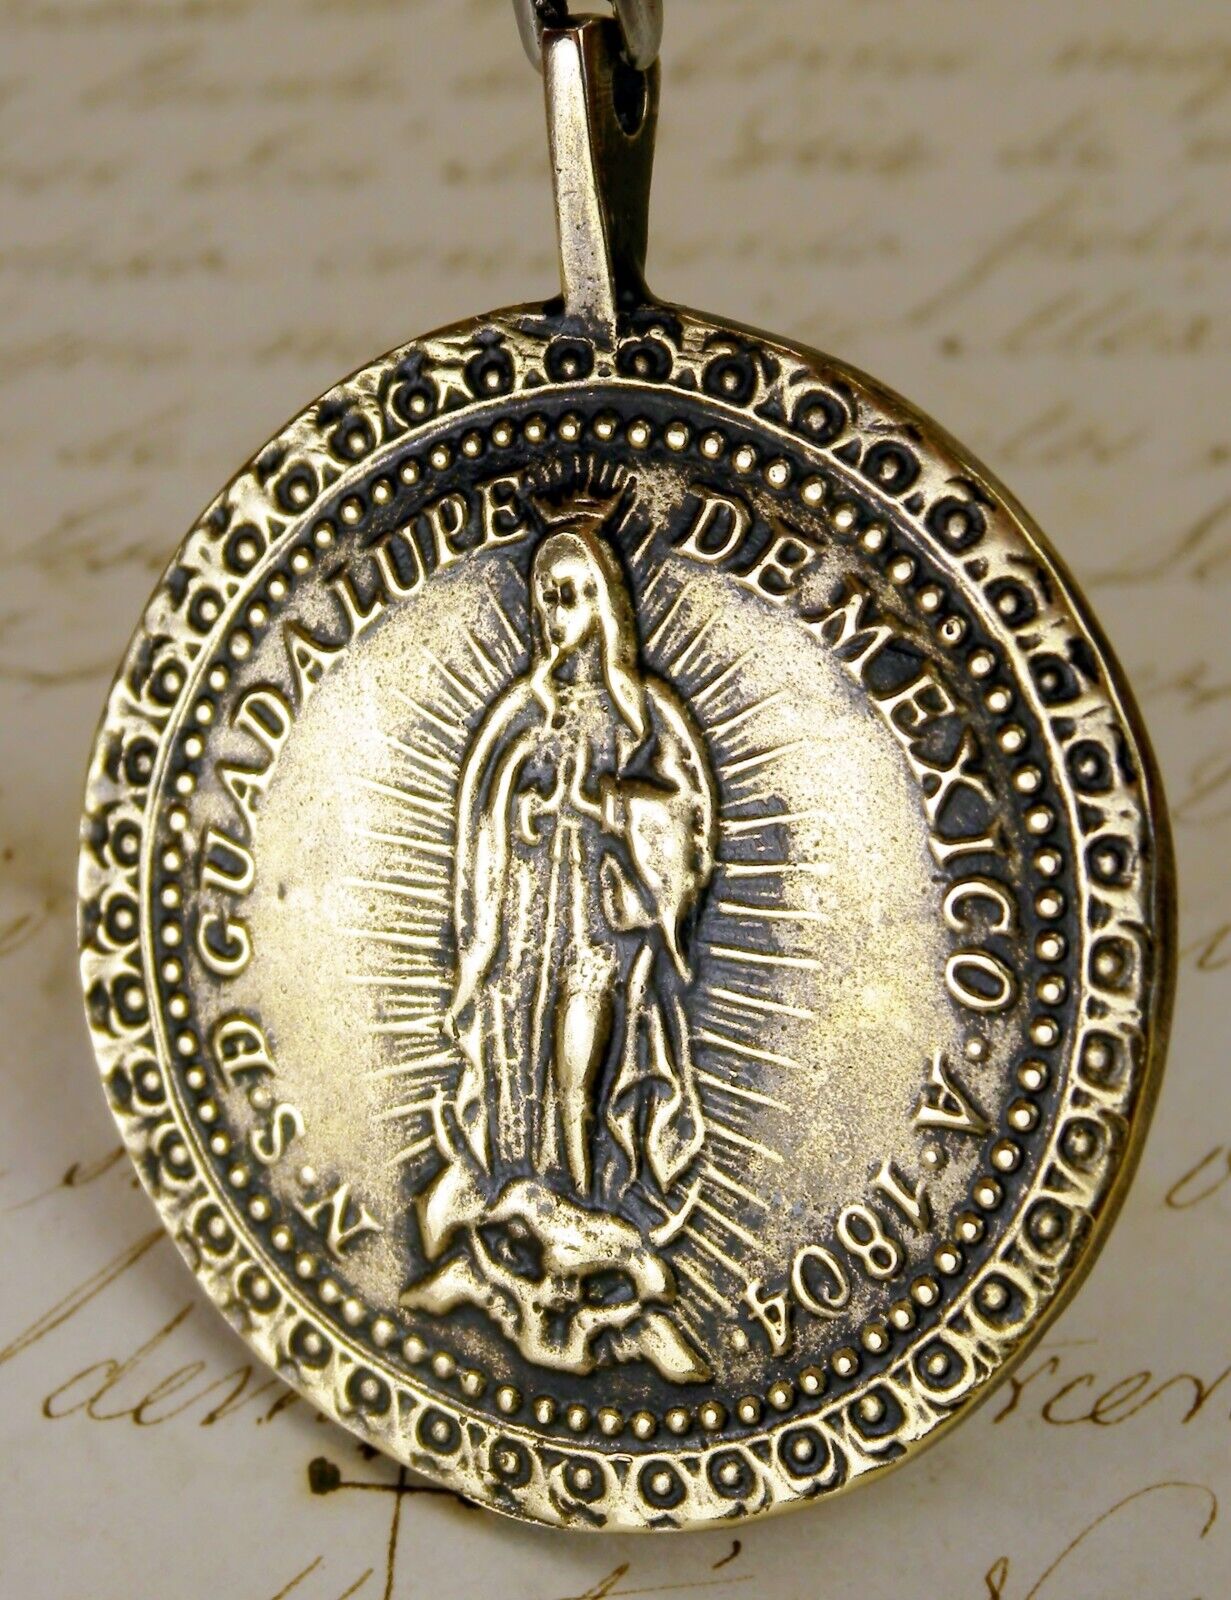 ANTIQUE DATED 1804 GUADALUPE MEXICO SHRINE PILGRIMAGE BRONZE ROSARY MEDAL